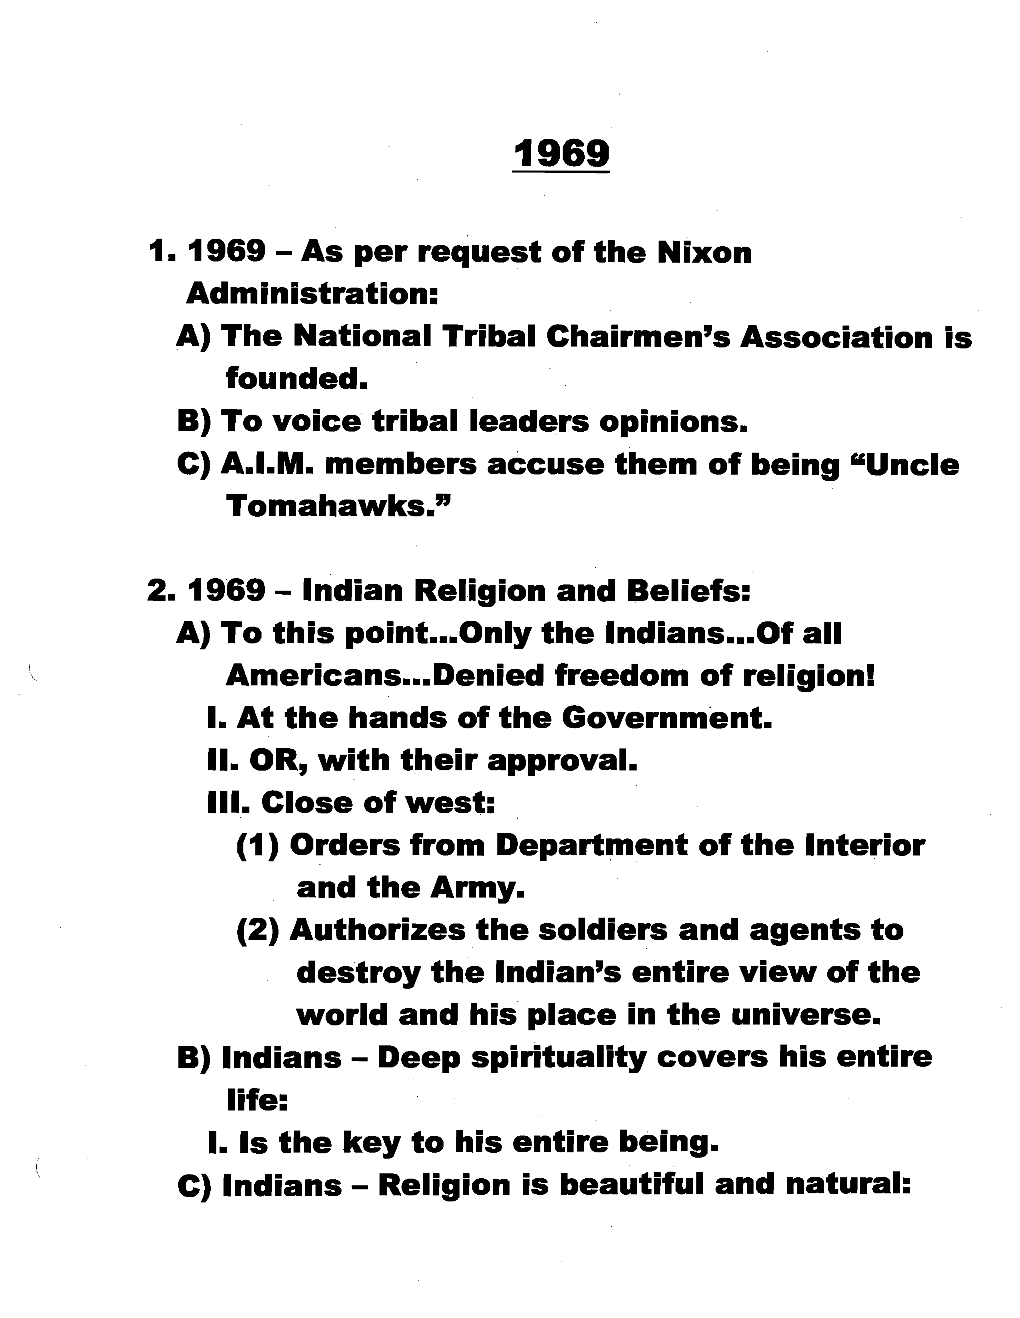 1. 1969 - As Per Request of the Nixon Administration: A) the National Tribal Chairmen's Association Is Founded